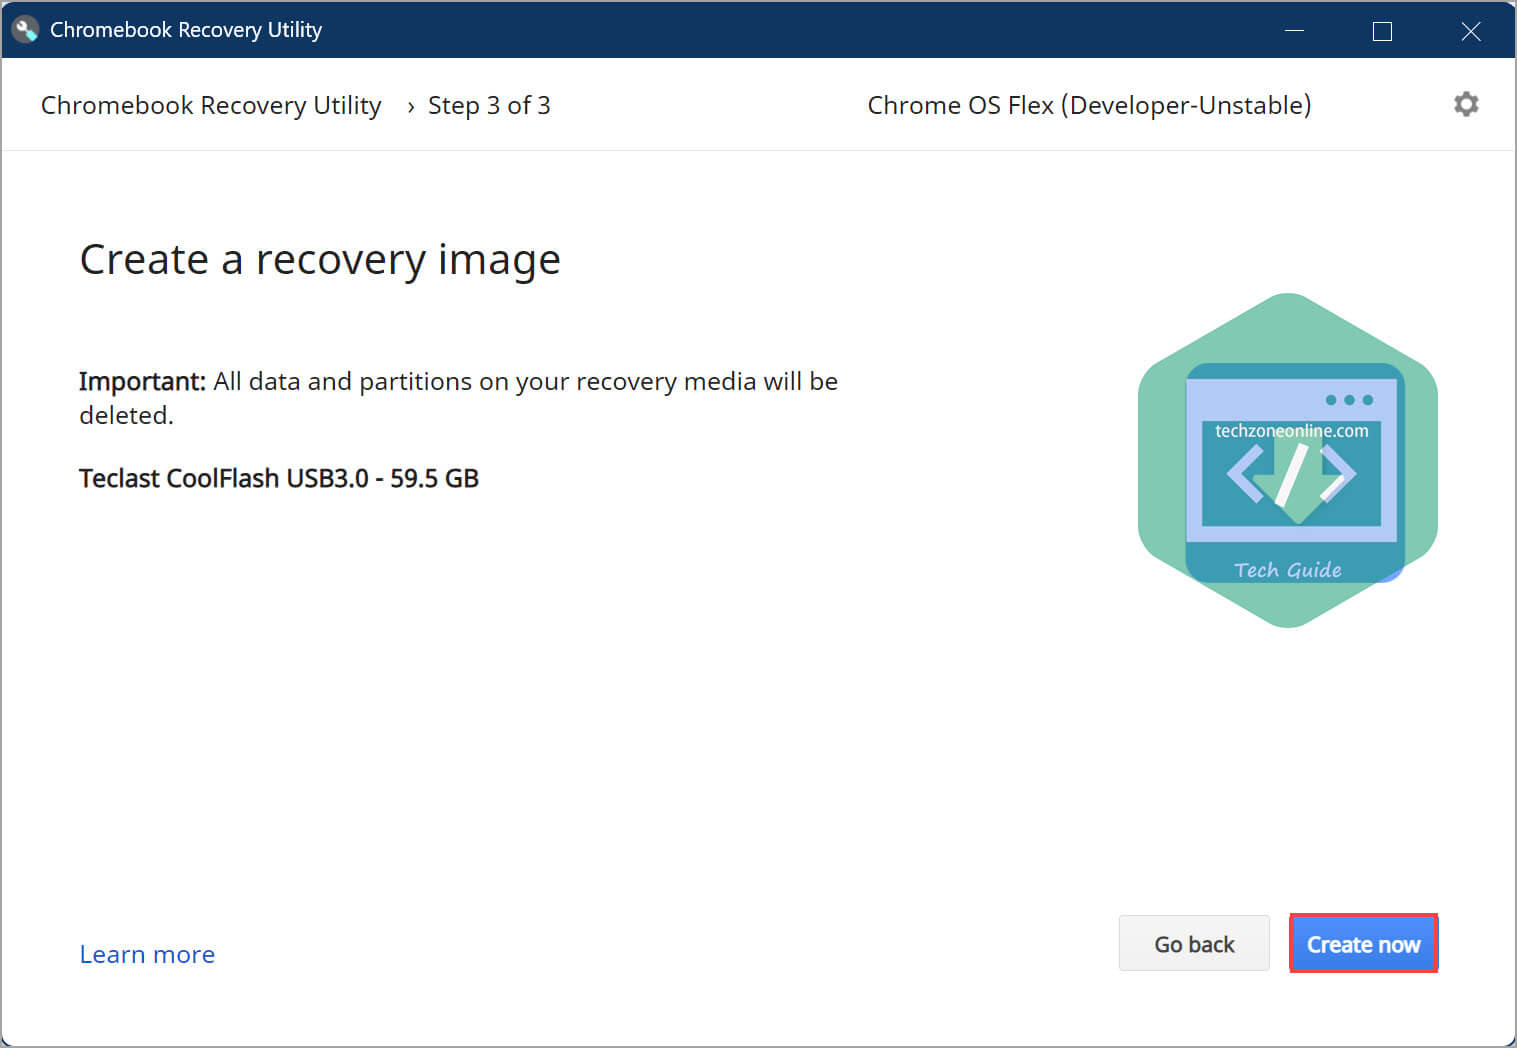 Create a recovery image